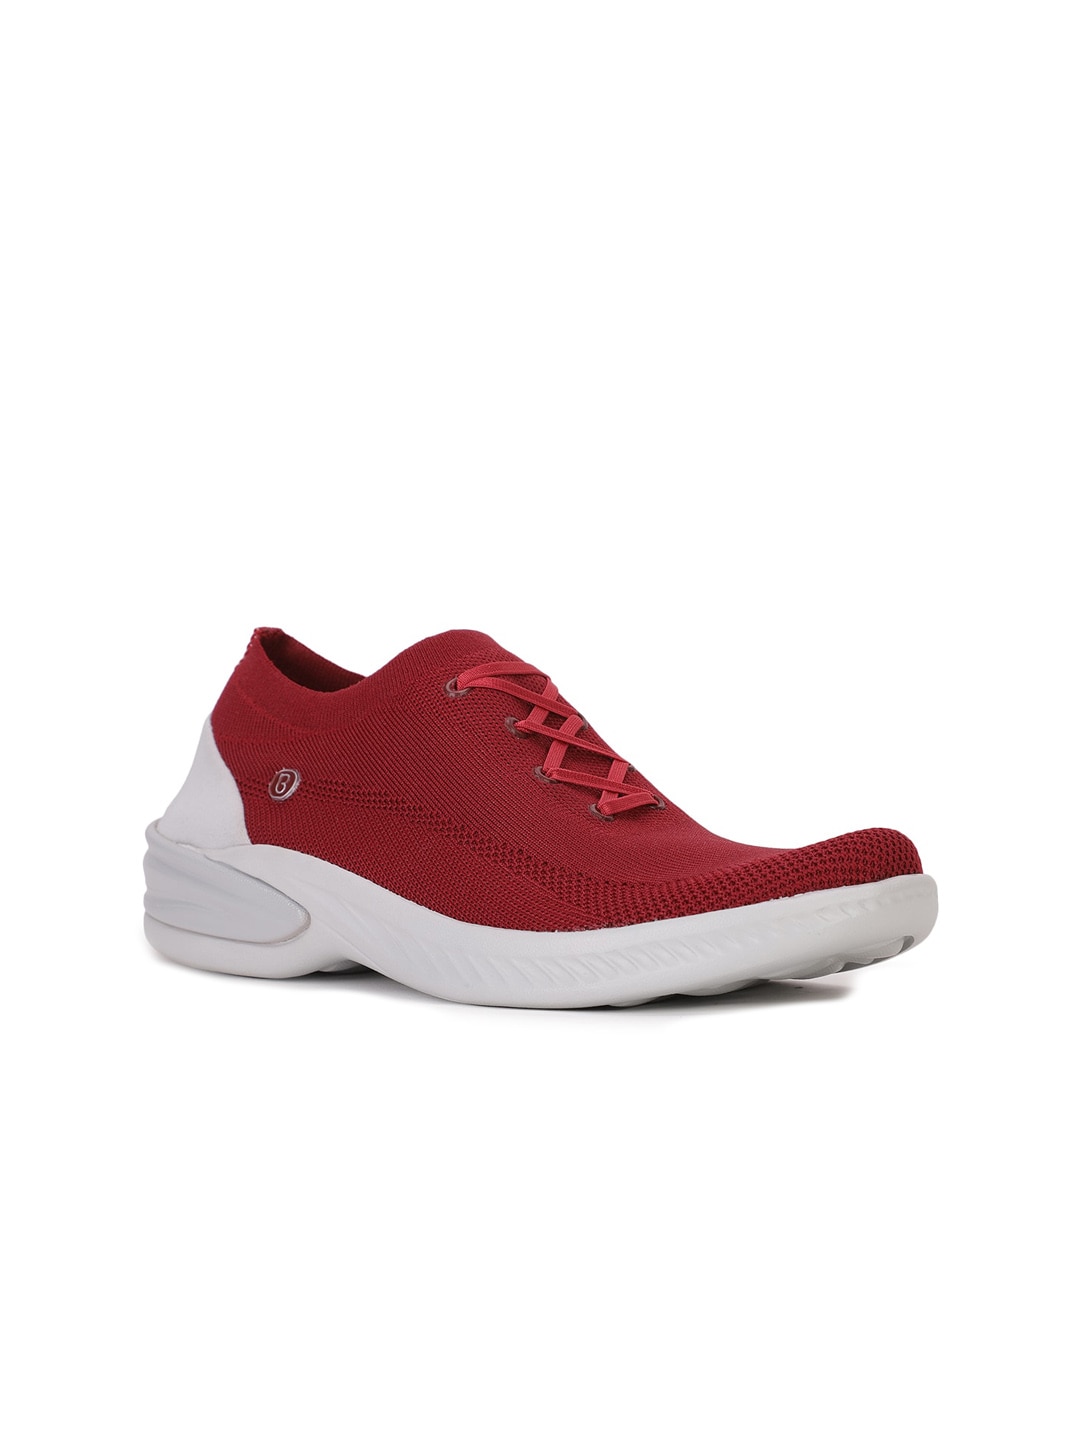 Naturalizer Women Red Woven Design PU Slip-On Sneakers Price in India